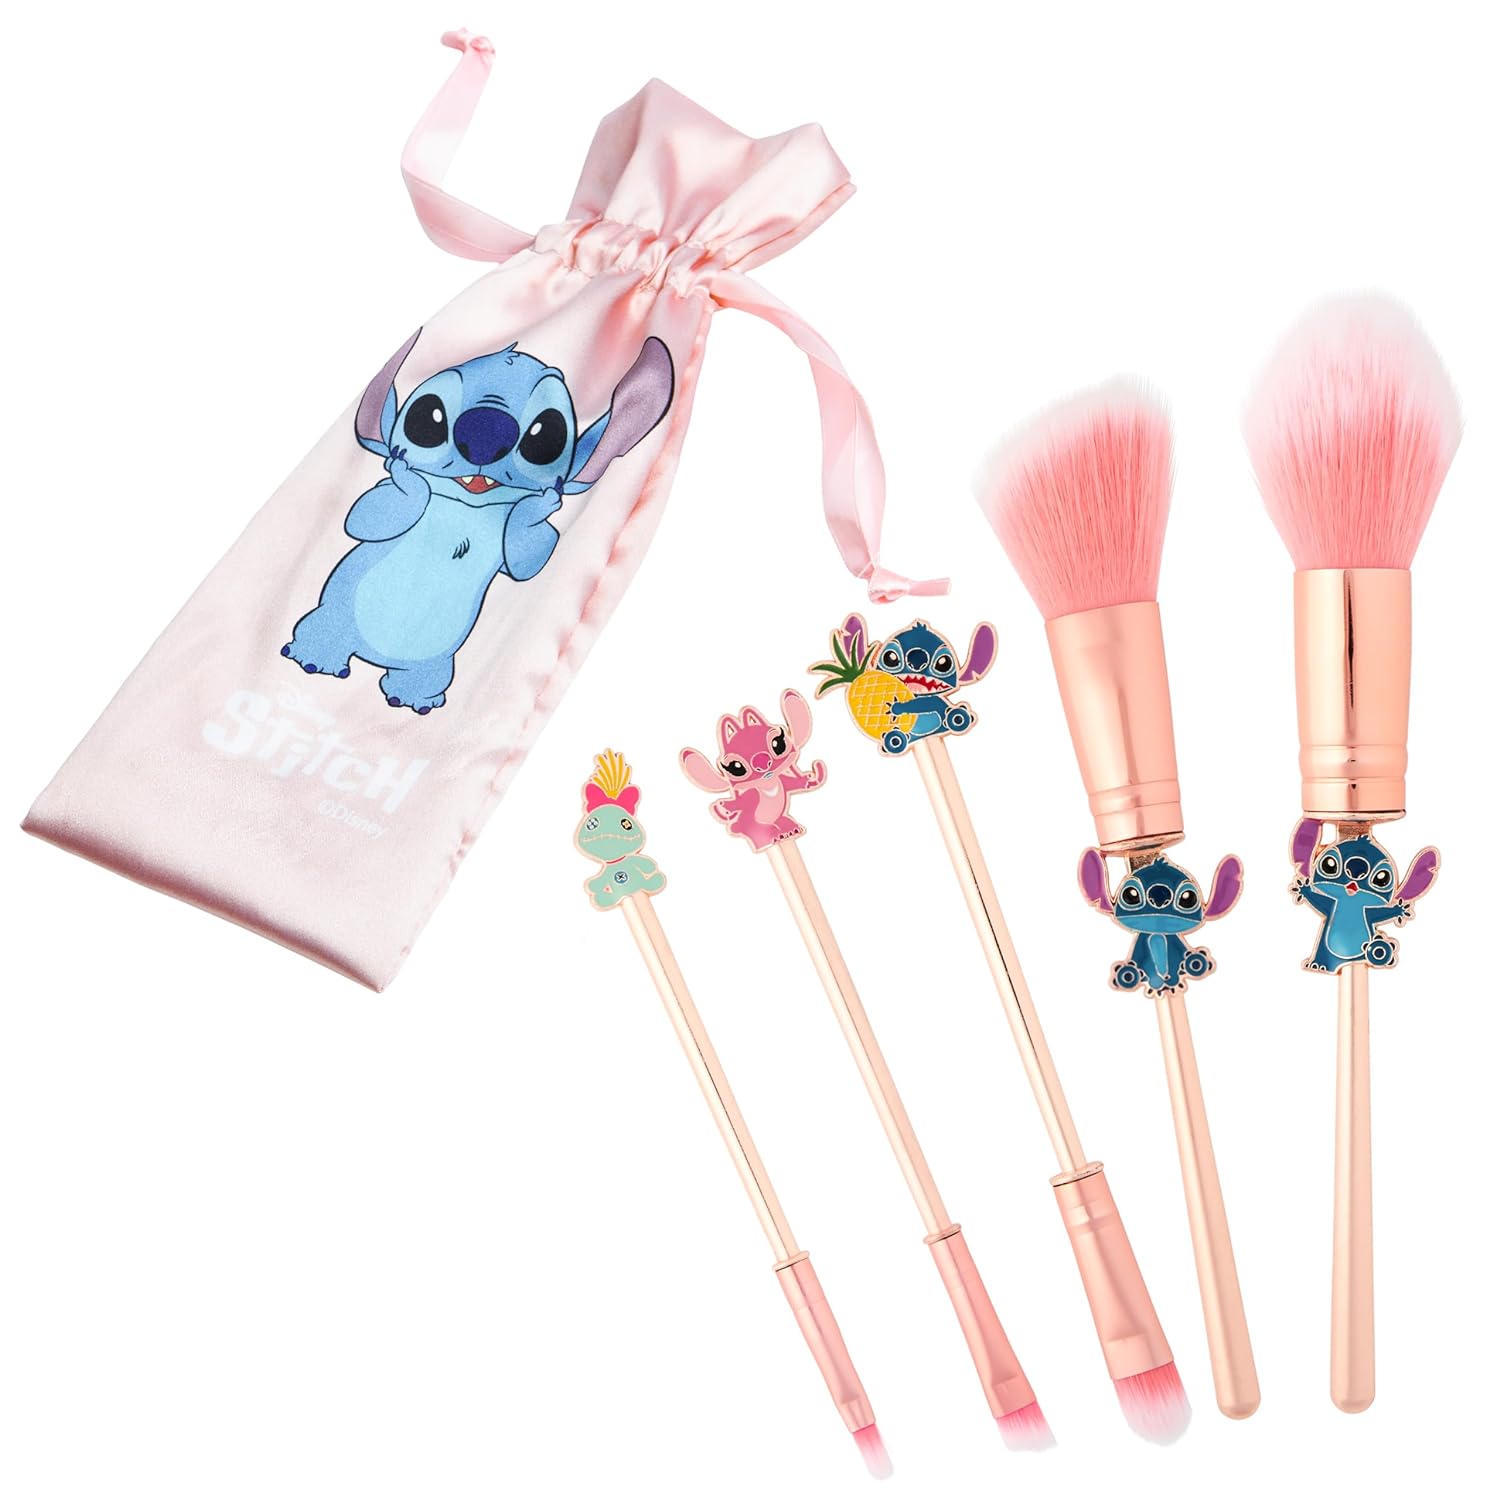 Disney Lilo and Stitch Makeup Brush Set - Includes Brush, Headband and Case - Stitch Gift for Women (pink)